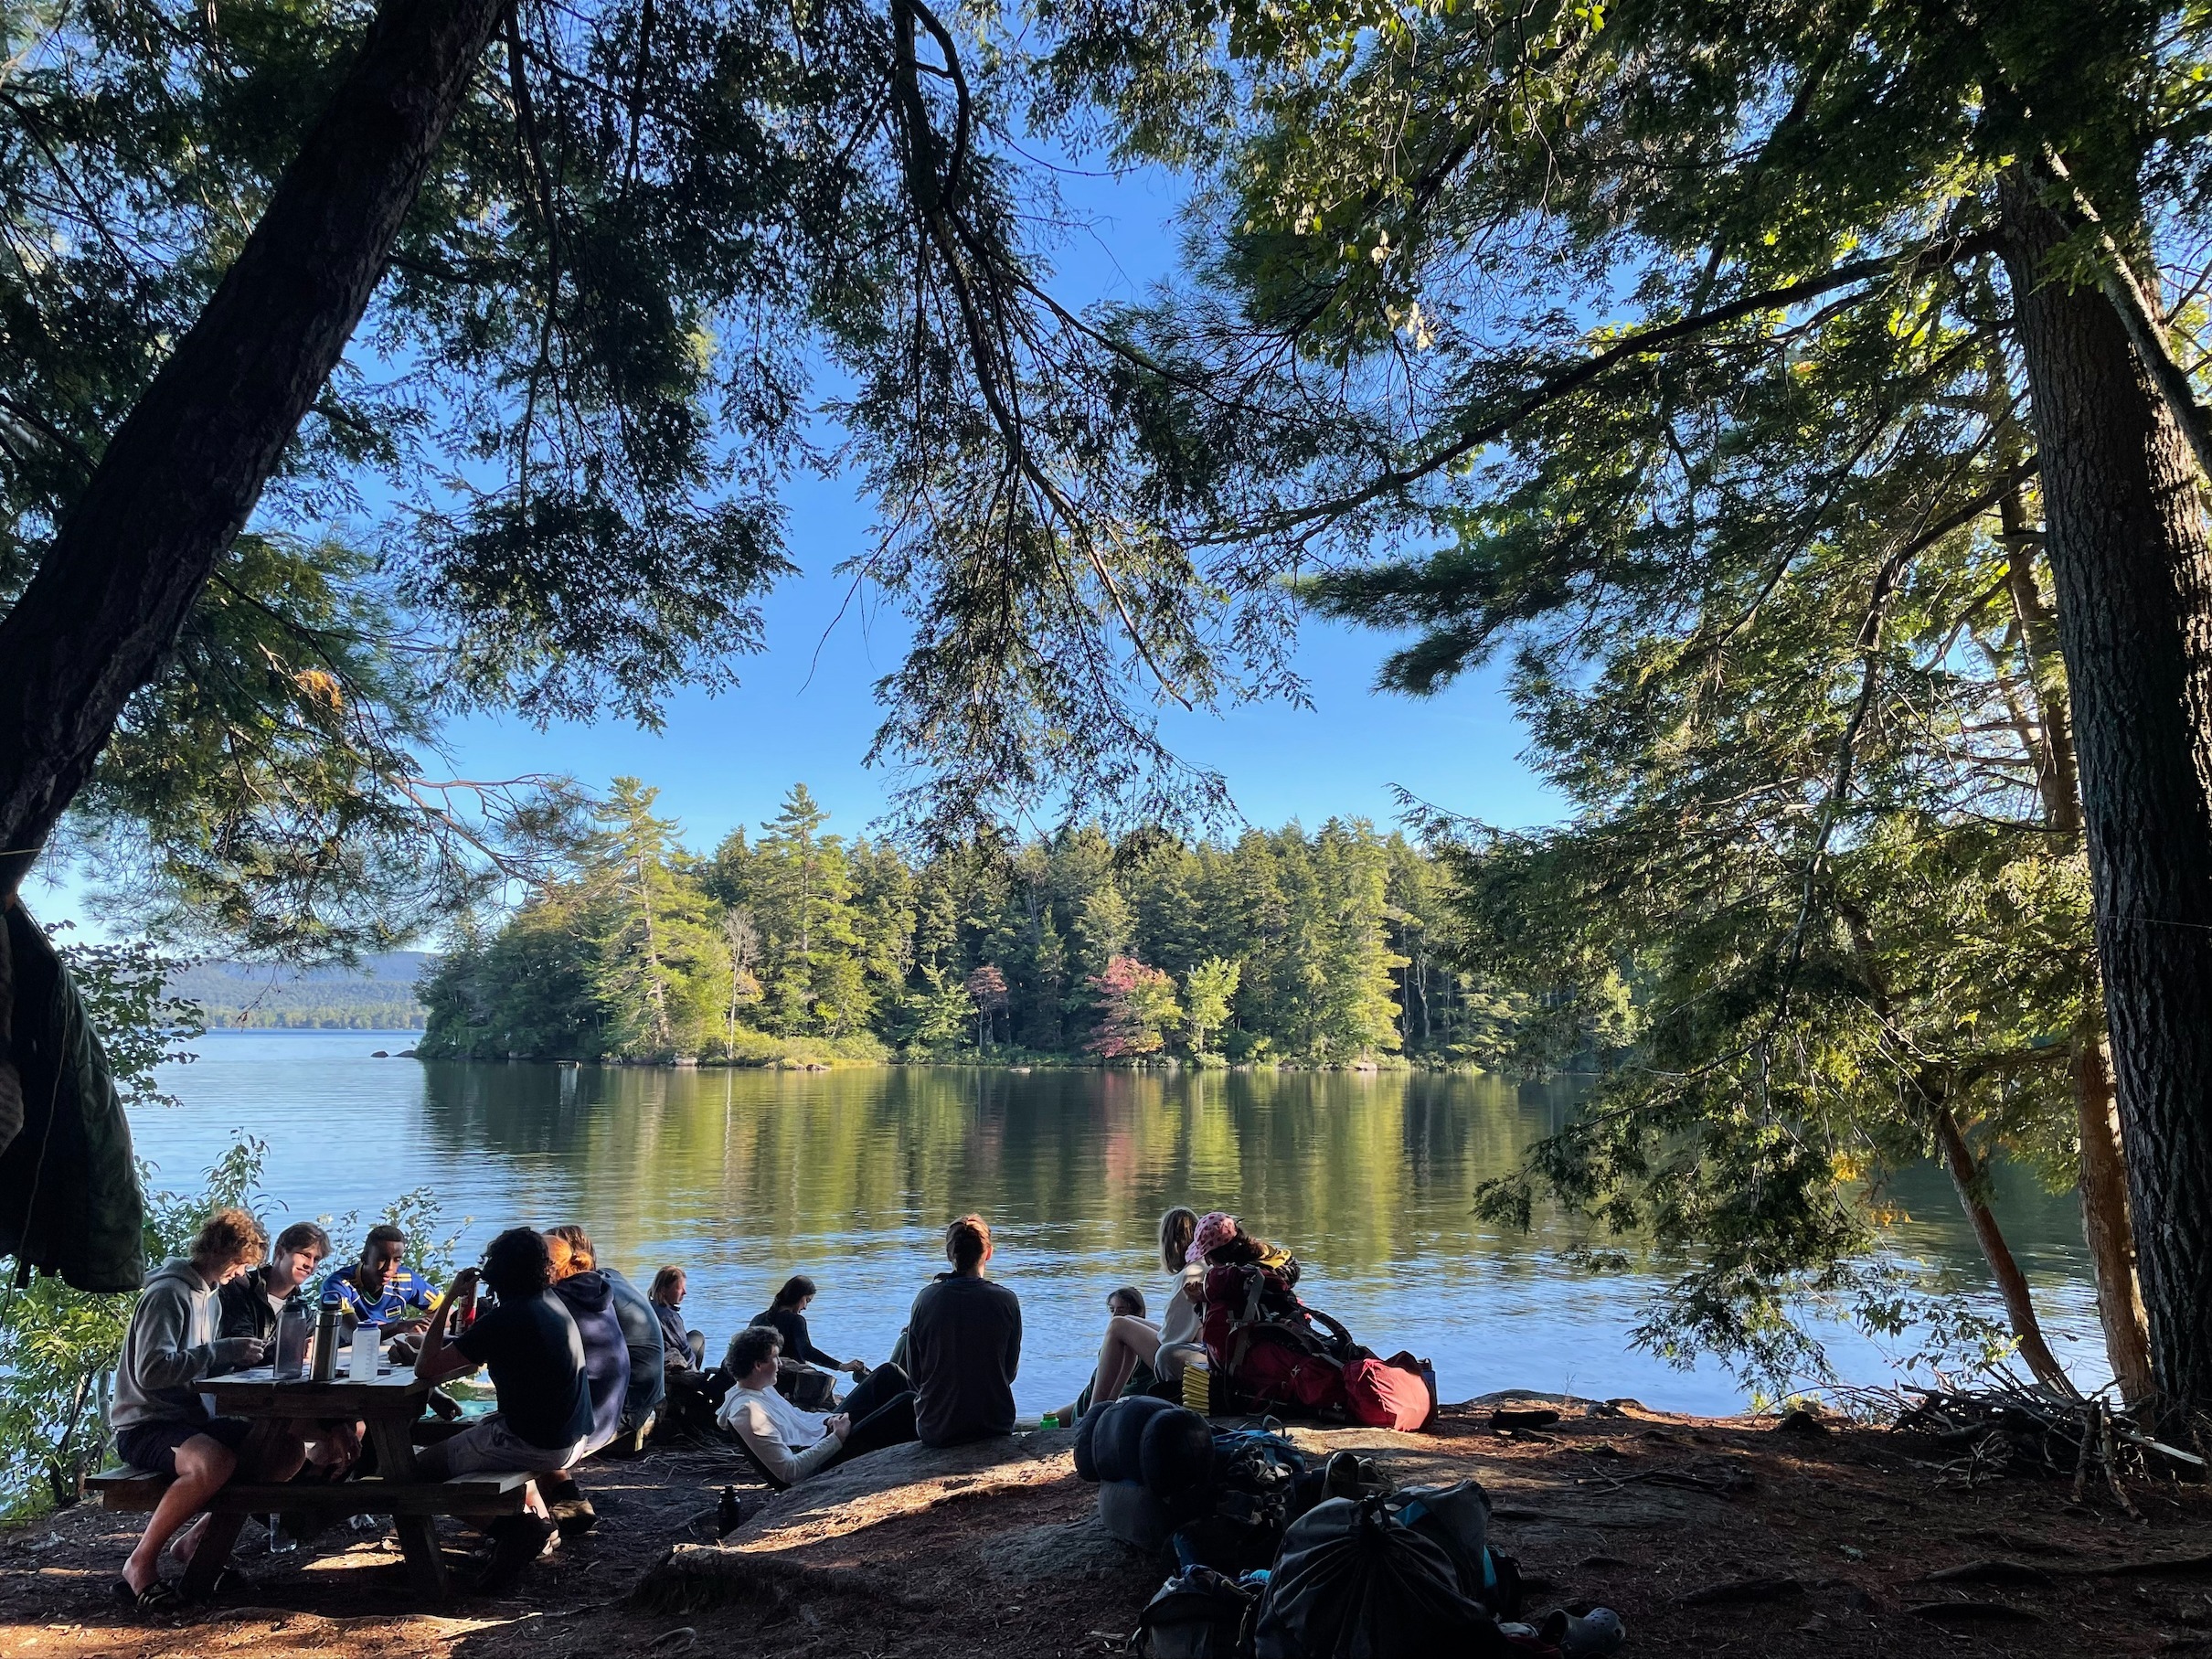 We see the backs of a group of students as they chat at a picnic table and look out across a lake.